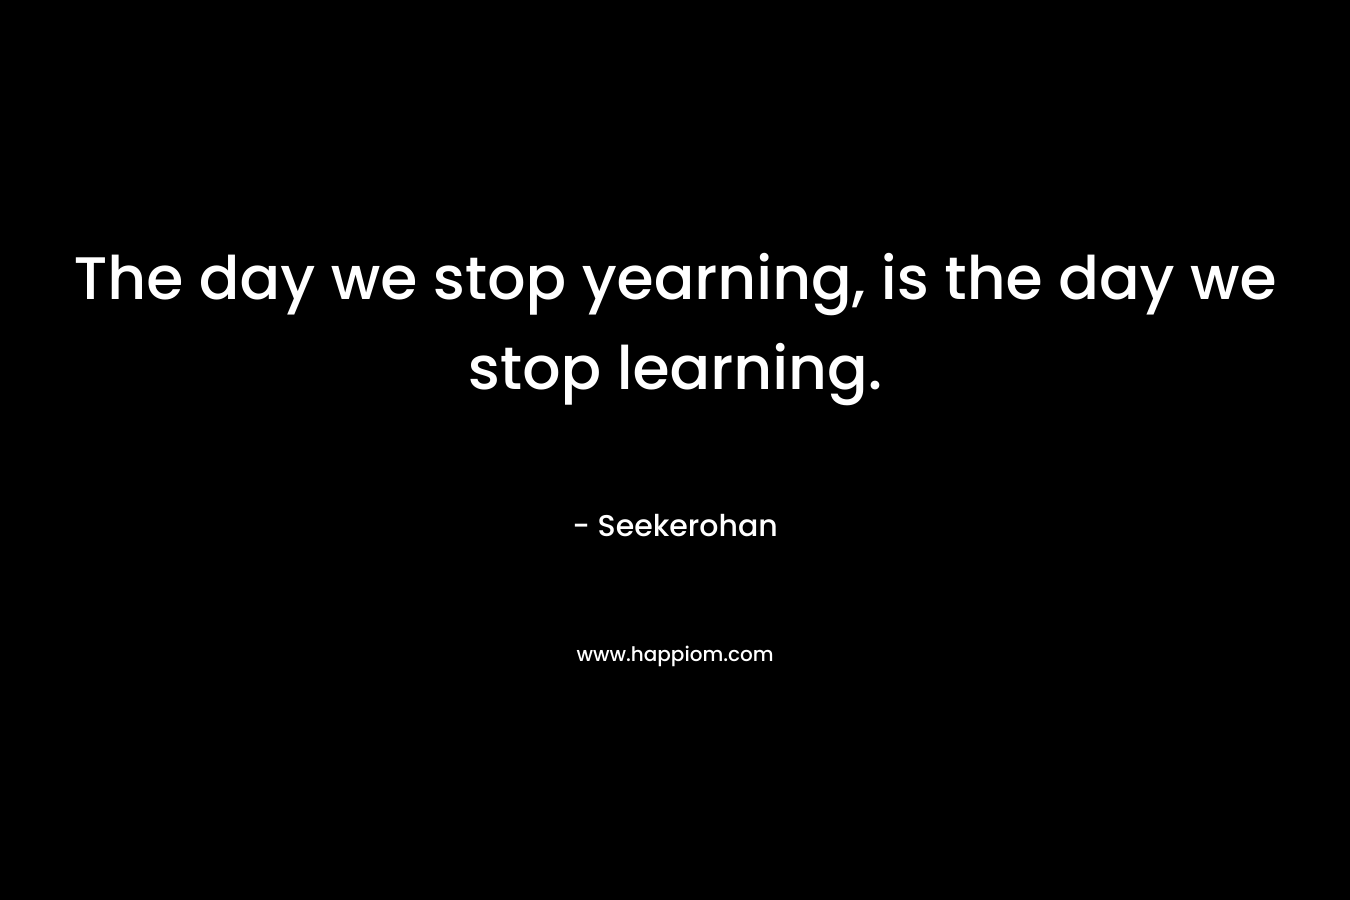 The day we stop yearning, is the day we stop learning.